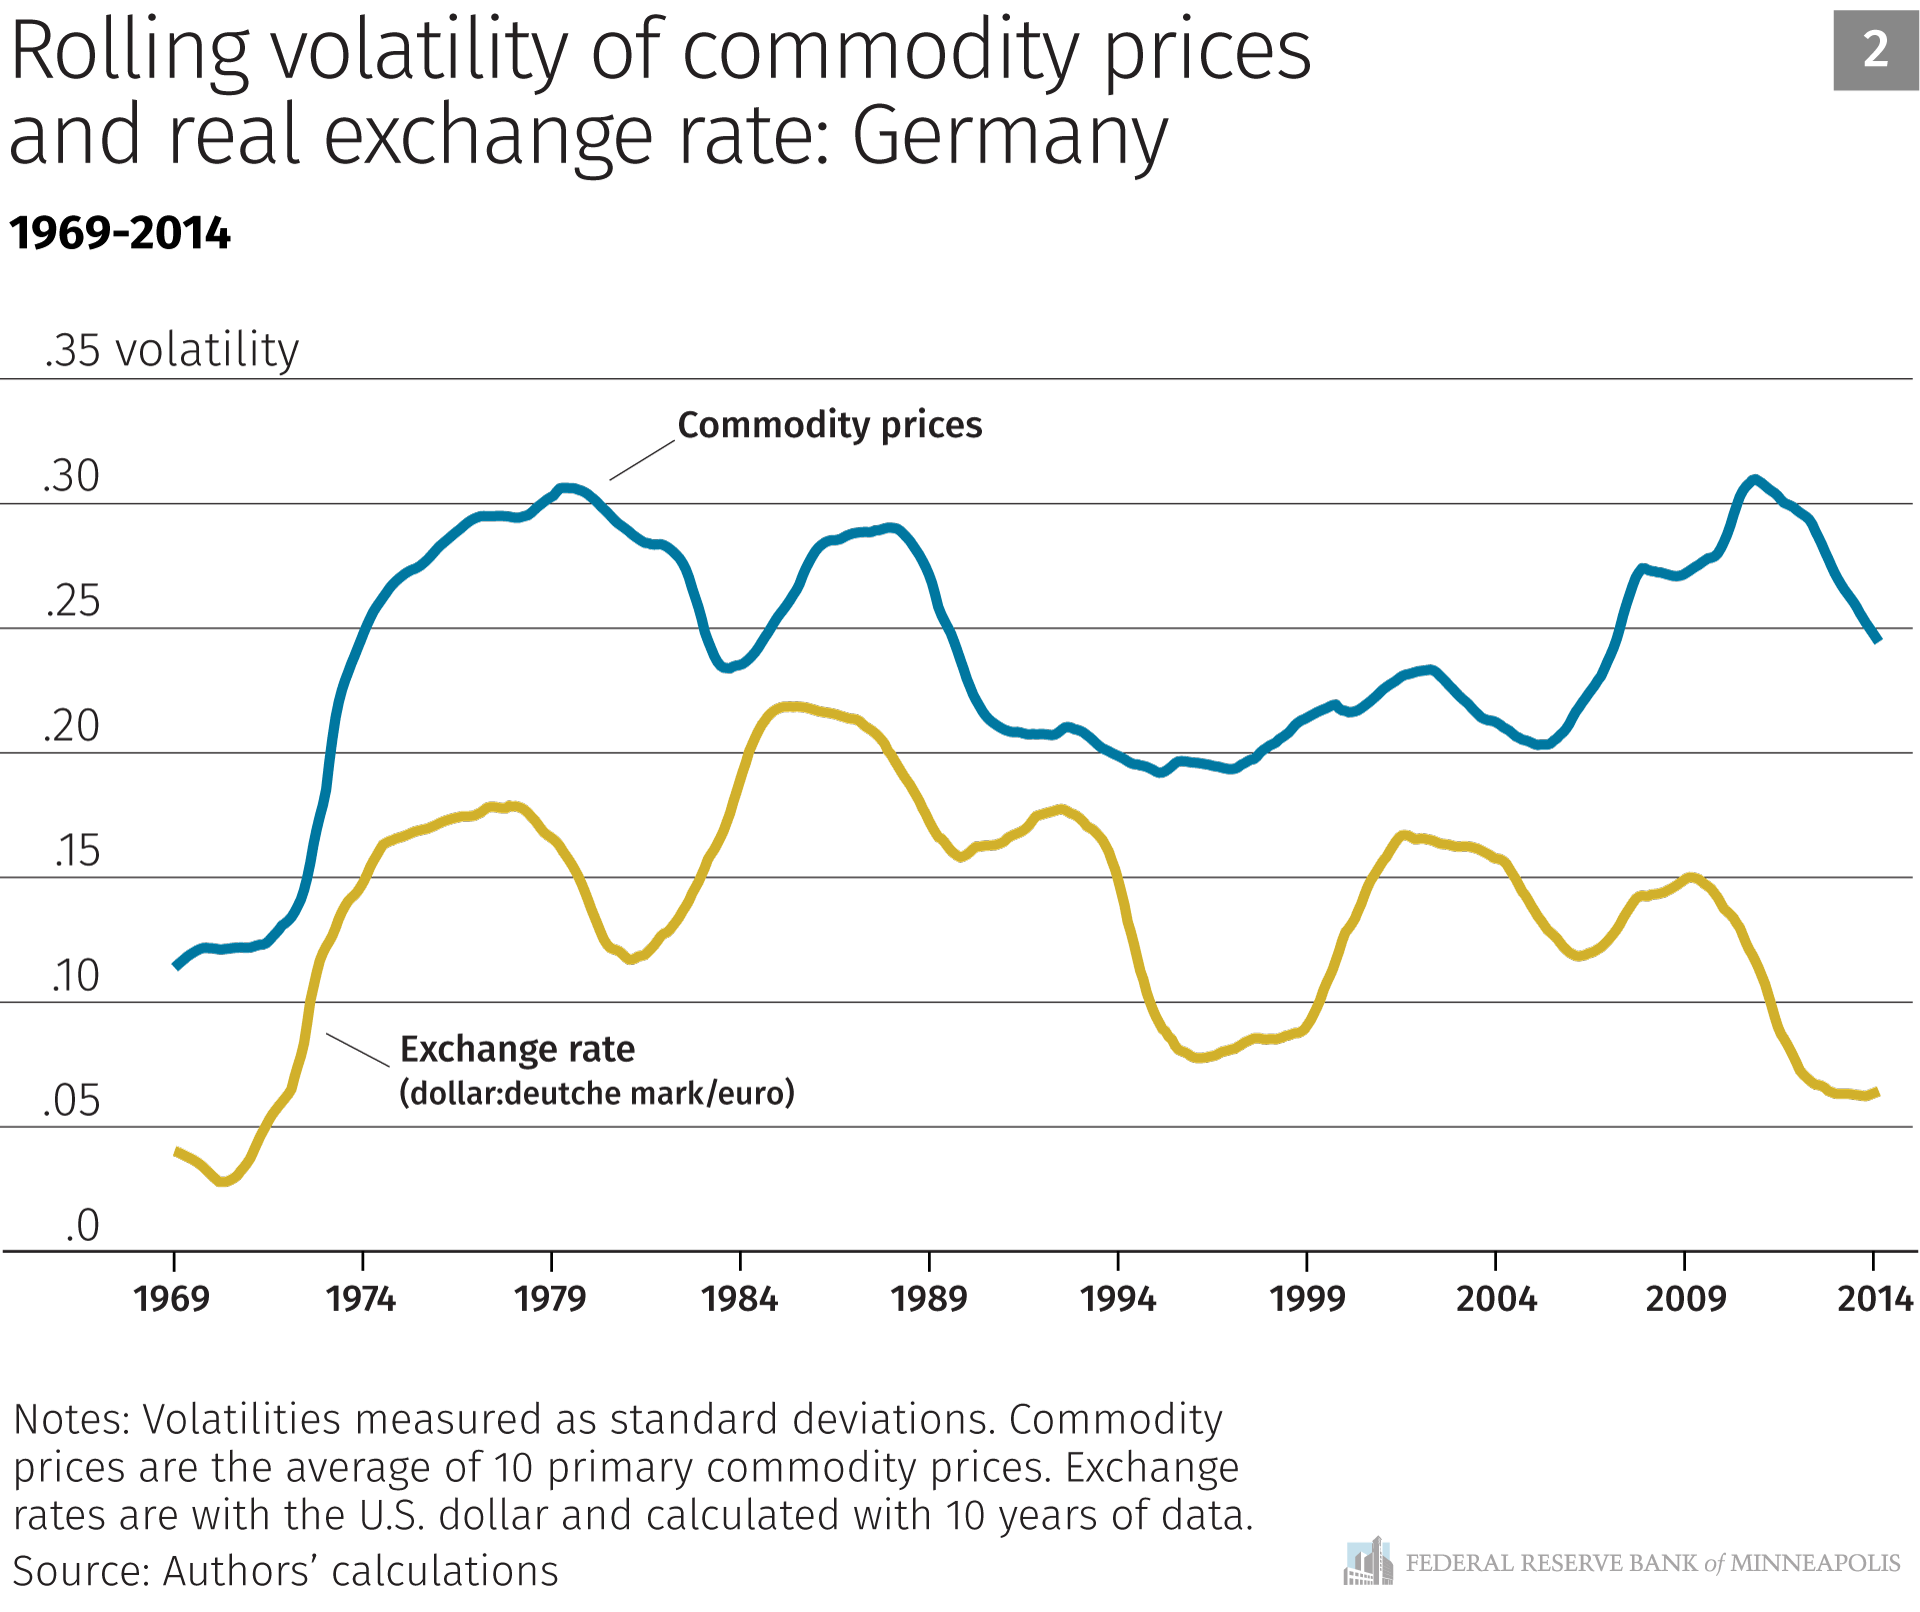 Rolling volatility of commodity prices and real exchange rate: Germany